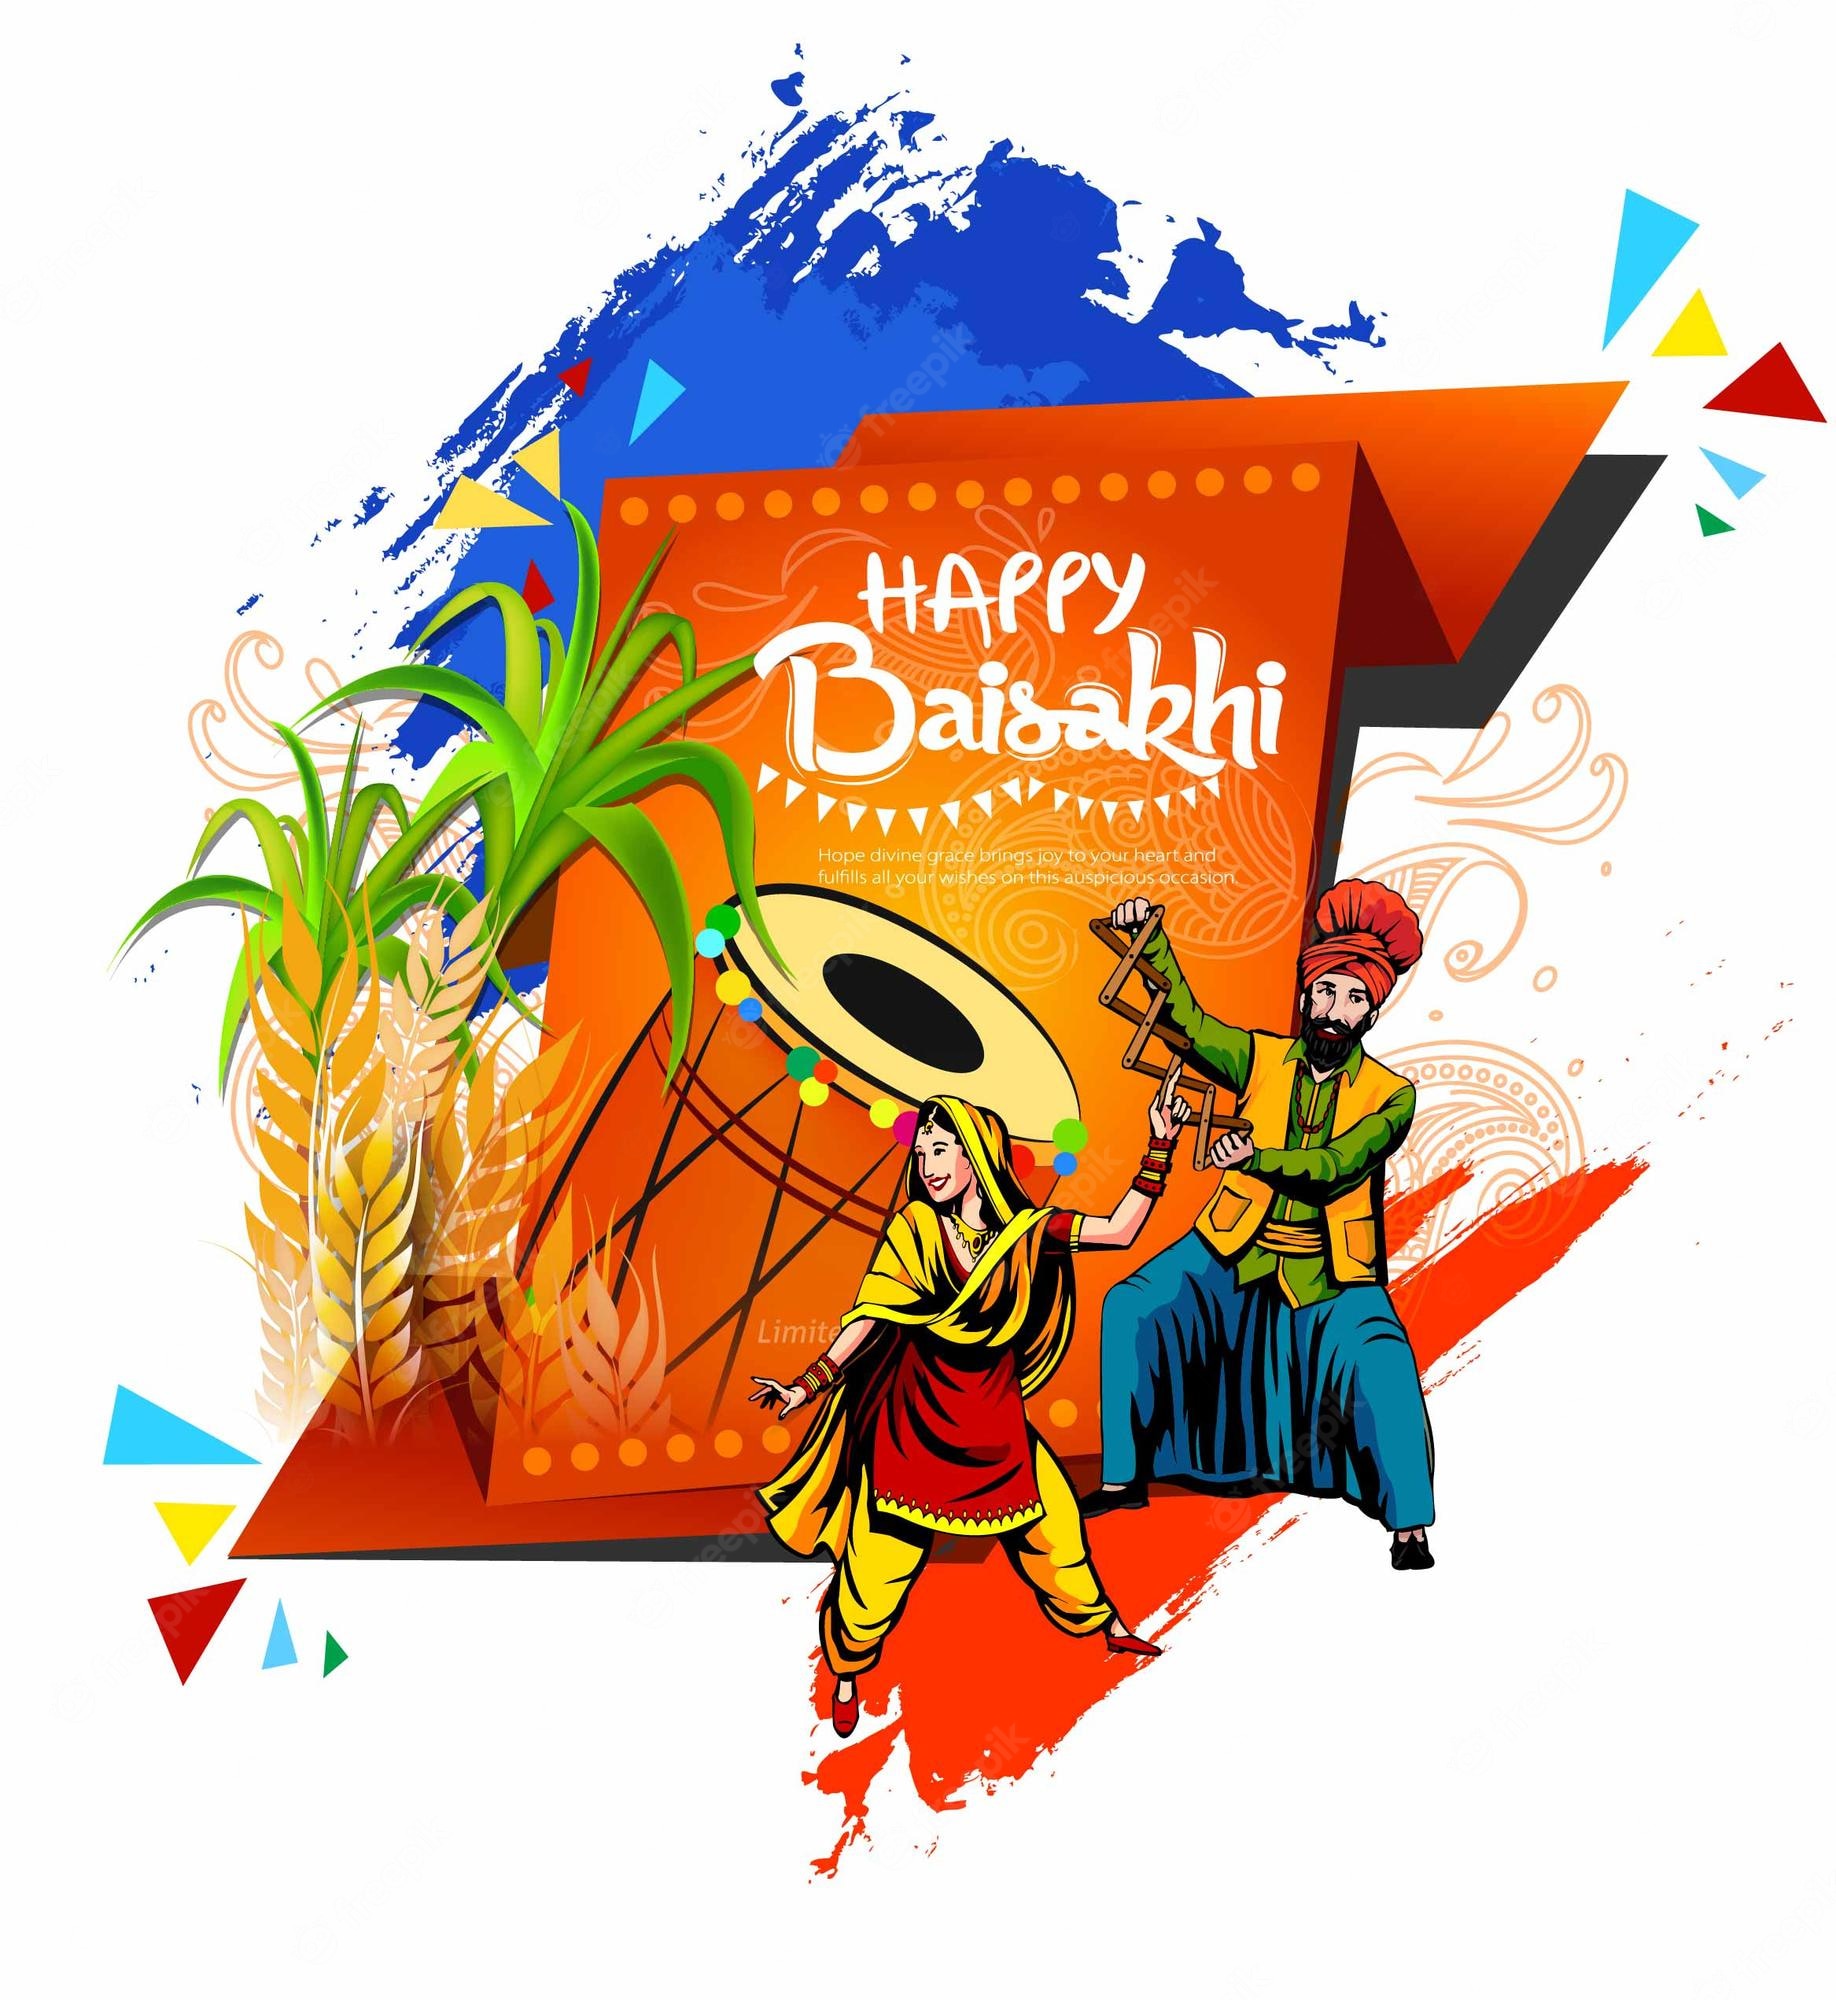 Baisakhi 2018: Images, Poems, Wallpapers & Photos to share | - Times of  India